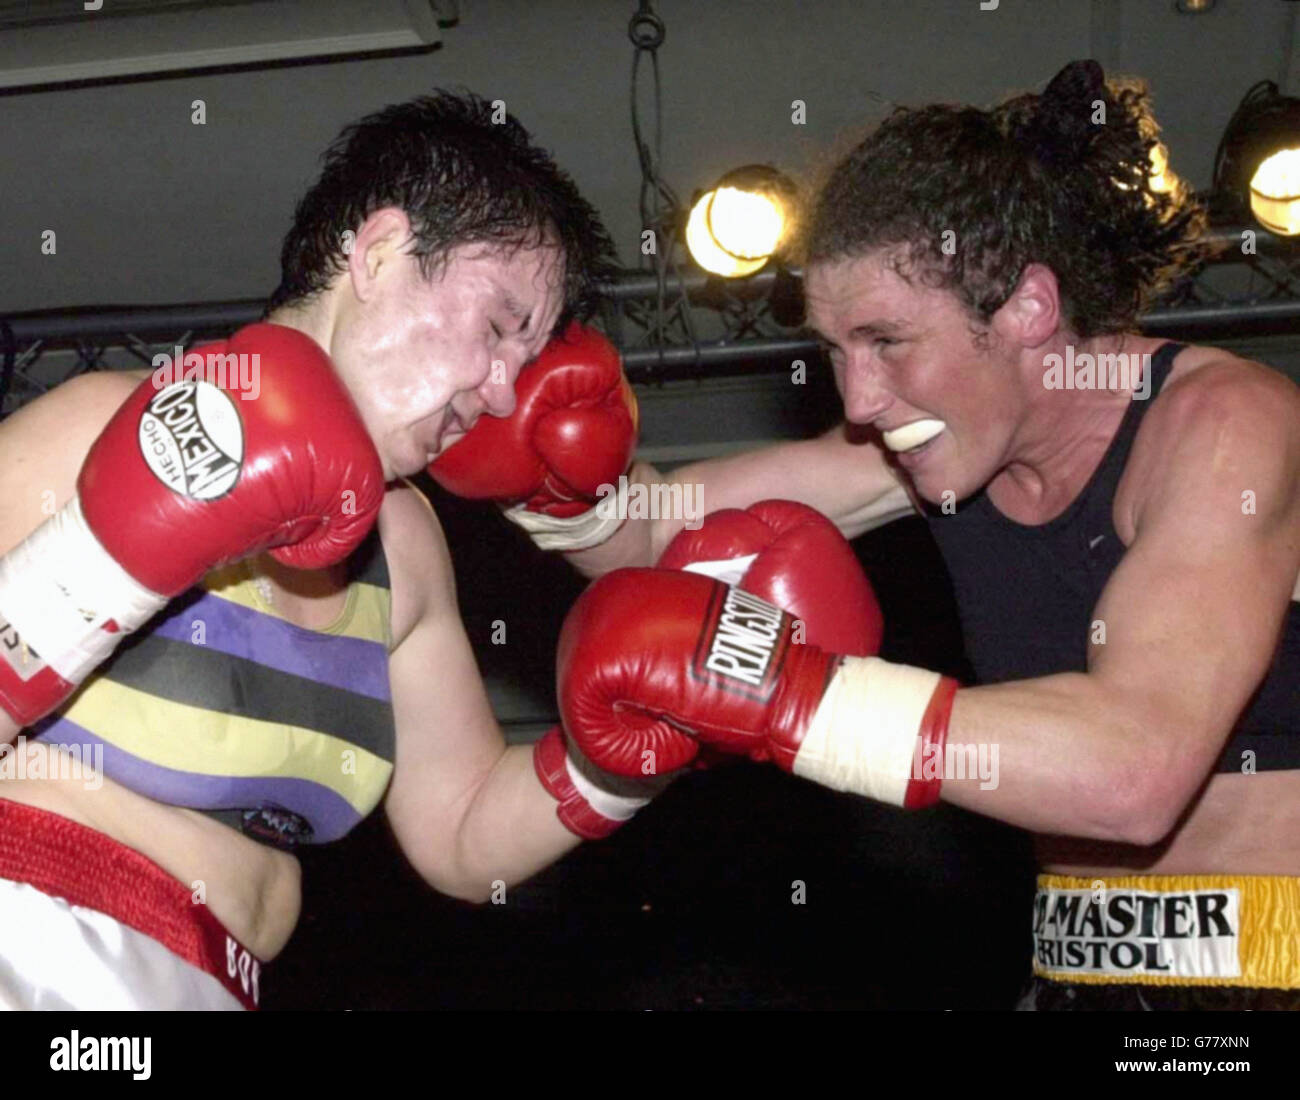 Jane Couch (right) on her way to a win as the referee stops the fight in Round 7. Jane Couch (World Champion) from Bristol and Borislava Goranova (Bulgarian Champion) clashing in their non-title light welterweight eight round fight at the Marriott Hotel. Jane has twice before beaten tonight's opponent. In 1998 with the backing of the Equal Opportunities Commission, Jane won a landmark victory against the British Boxing Board of Control to enable her to gain a licence to box in Britain. Jane's next fight is due in May and talks are continuing about a possible clash with Laila Ali. Stock Photo